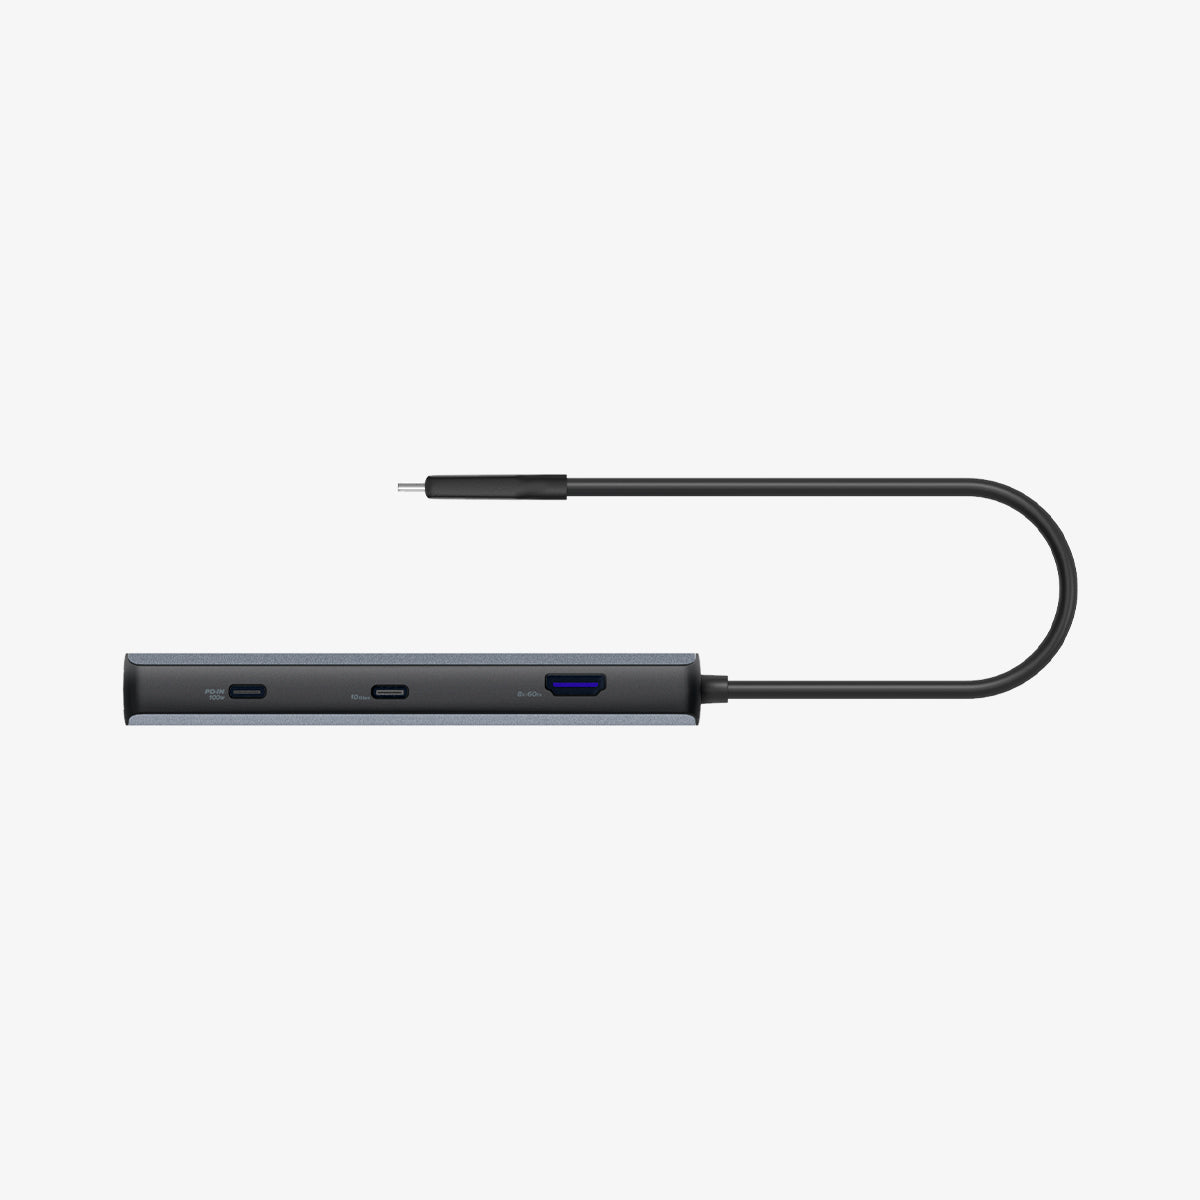 ACA06193 - ArcDock Pro Multi Hub 6-in-1 PD2302 in Space Gray showing the side with an HDMI and 2 USB-C type ports with an attached cable bending upward